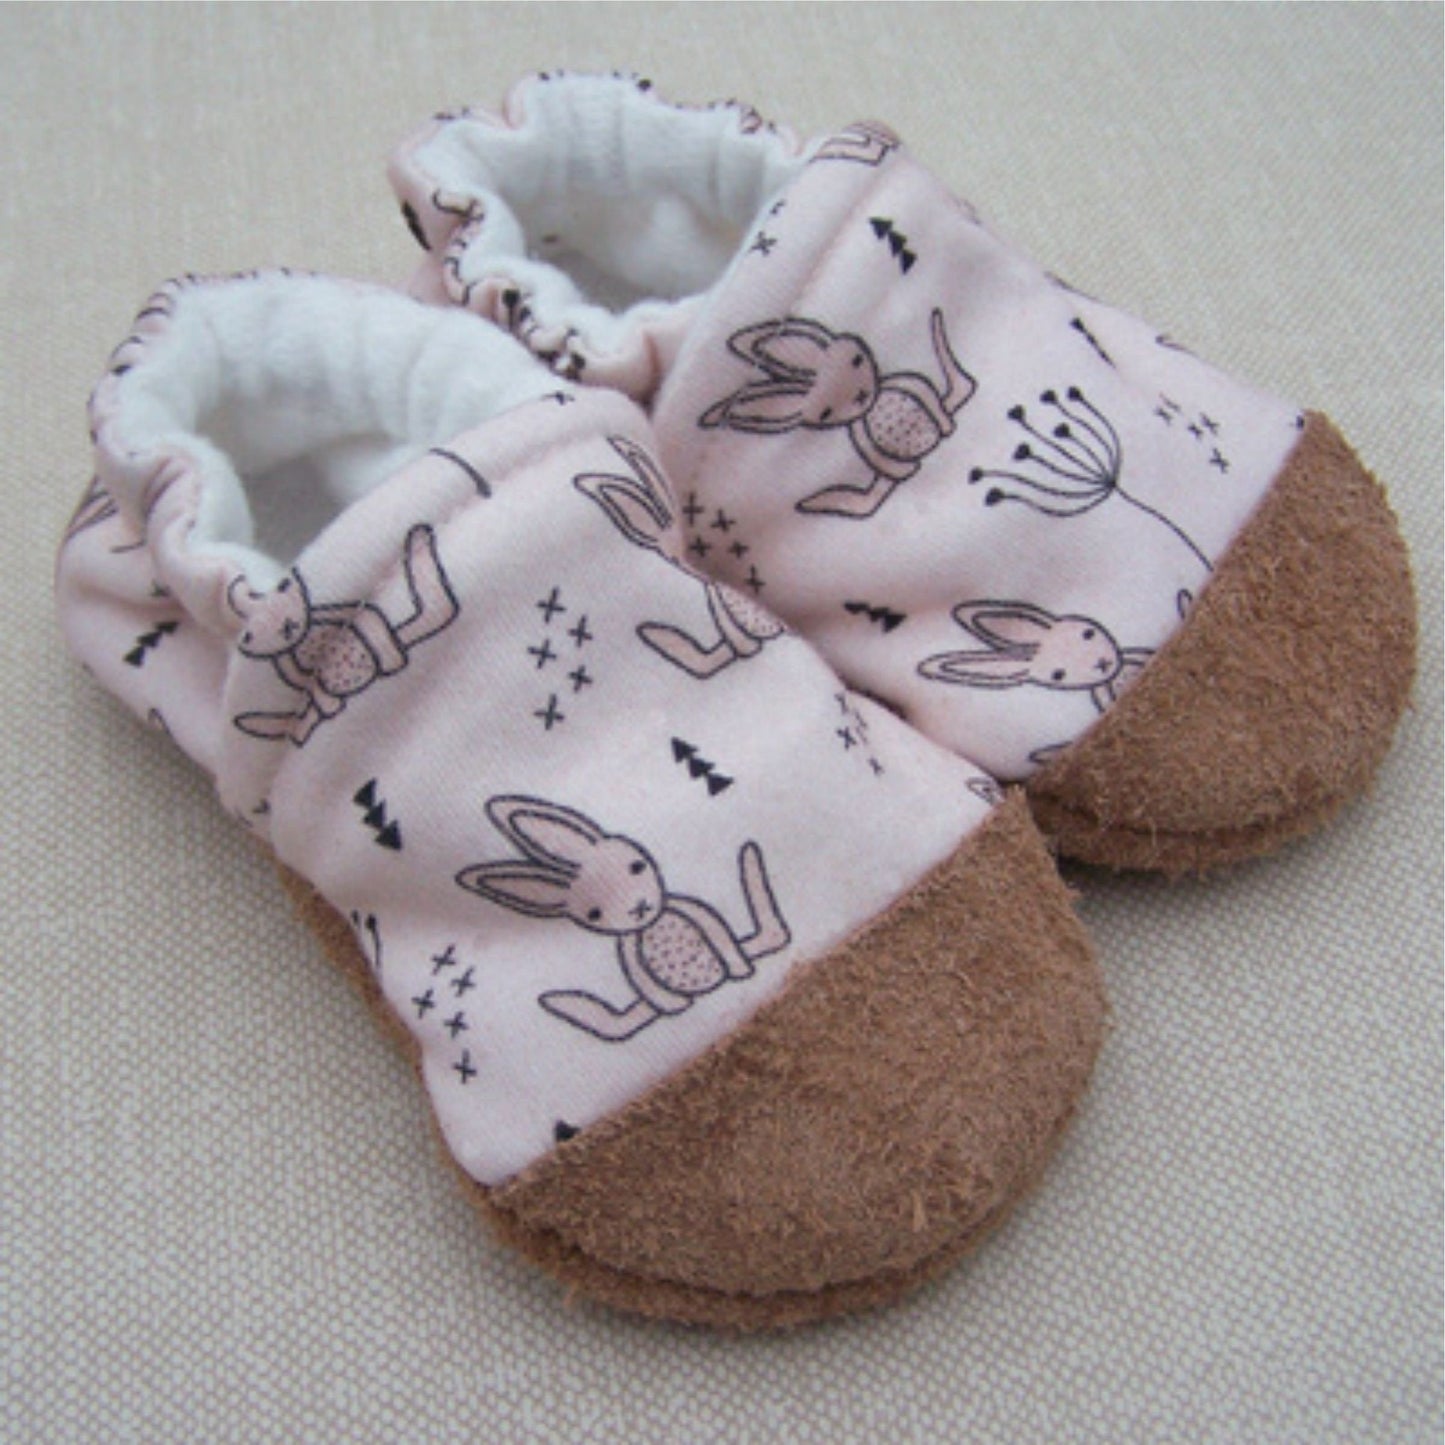 Snow and Arrow Organic Cotton Infant and Toddler Slippers | Baby Bunny